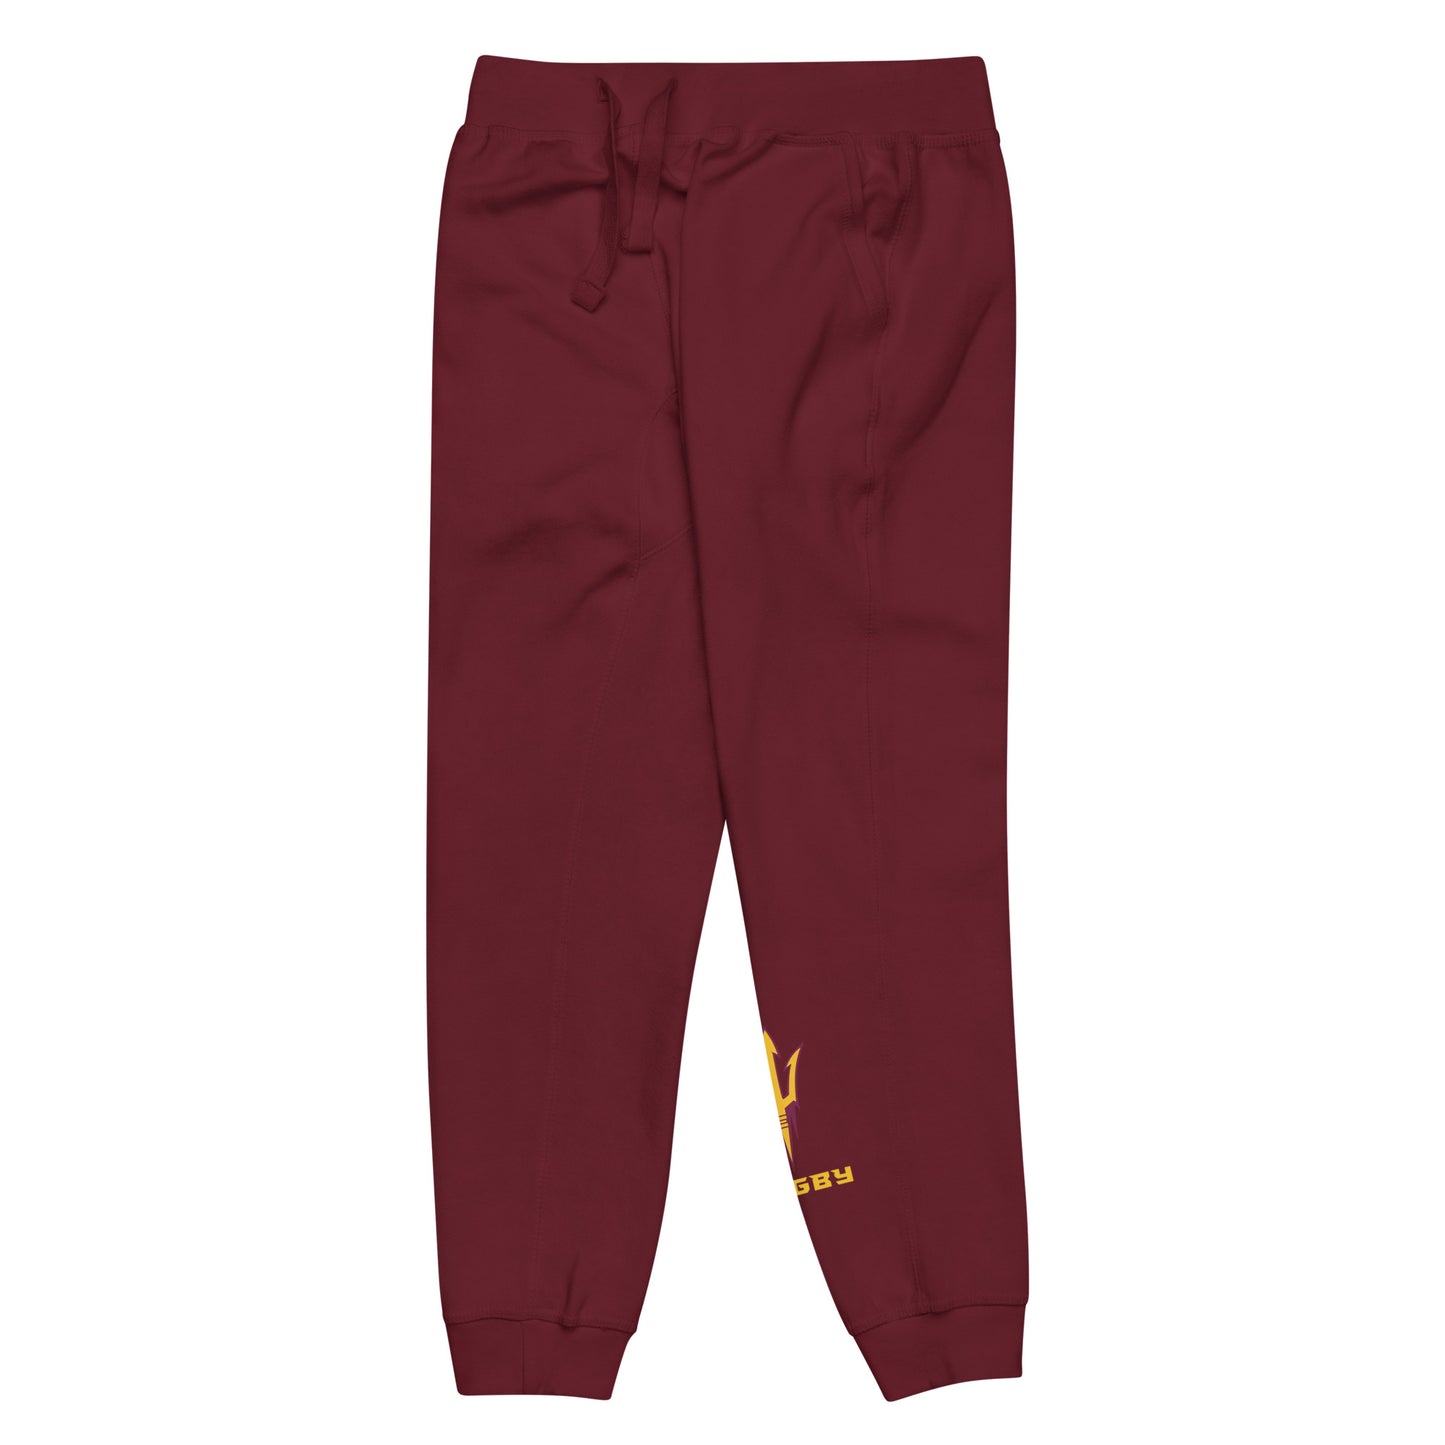 Rugby Sweatpants